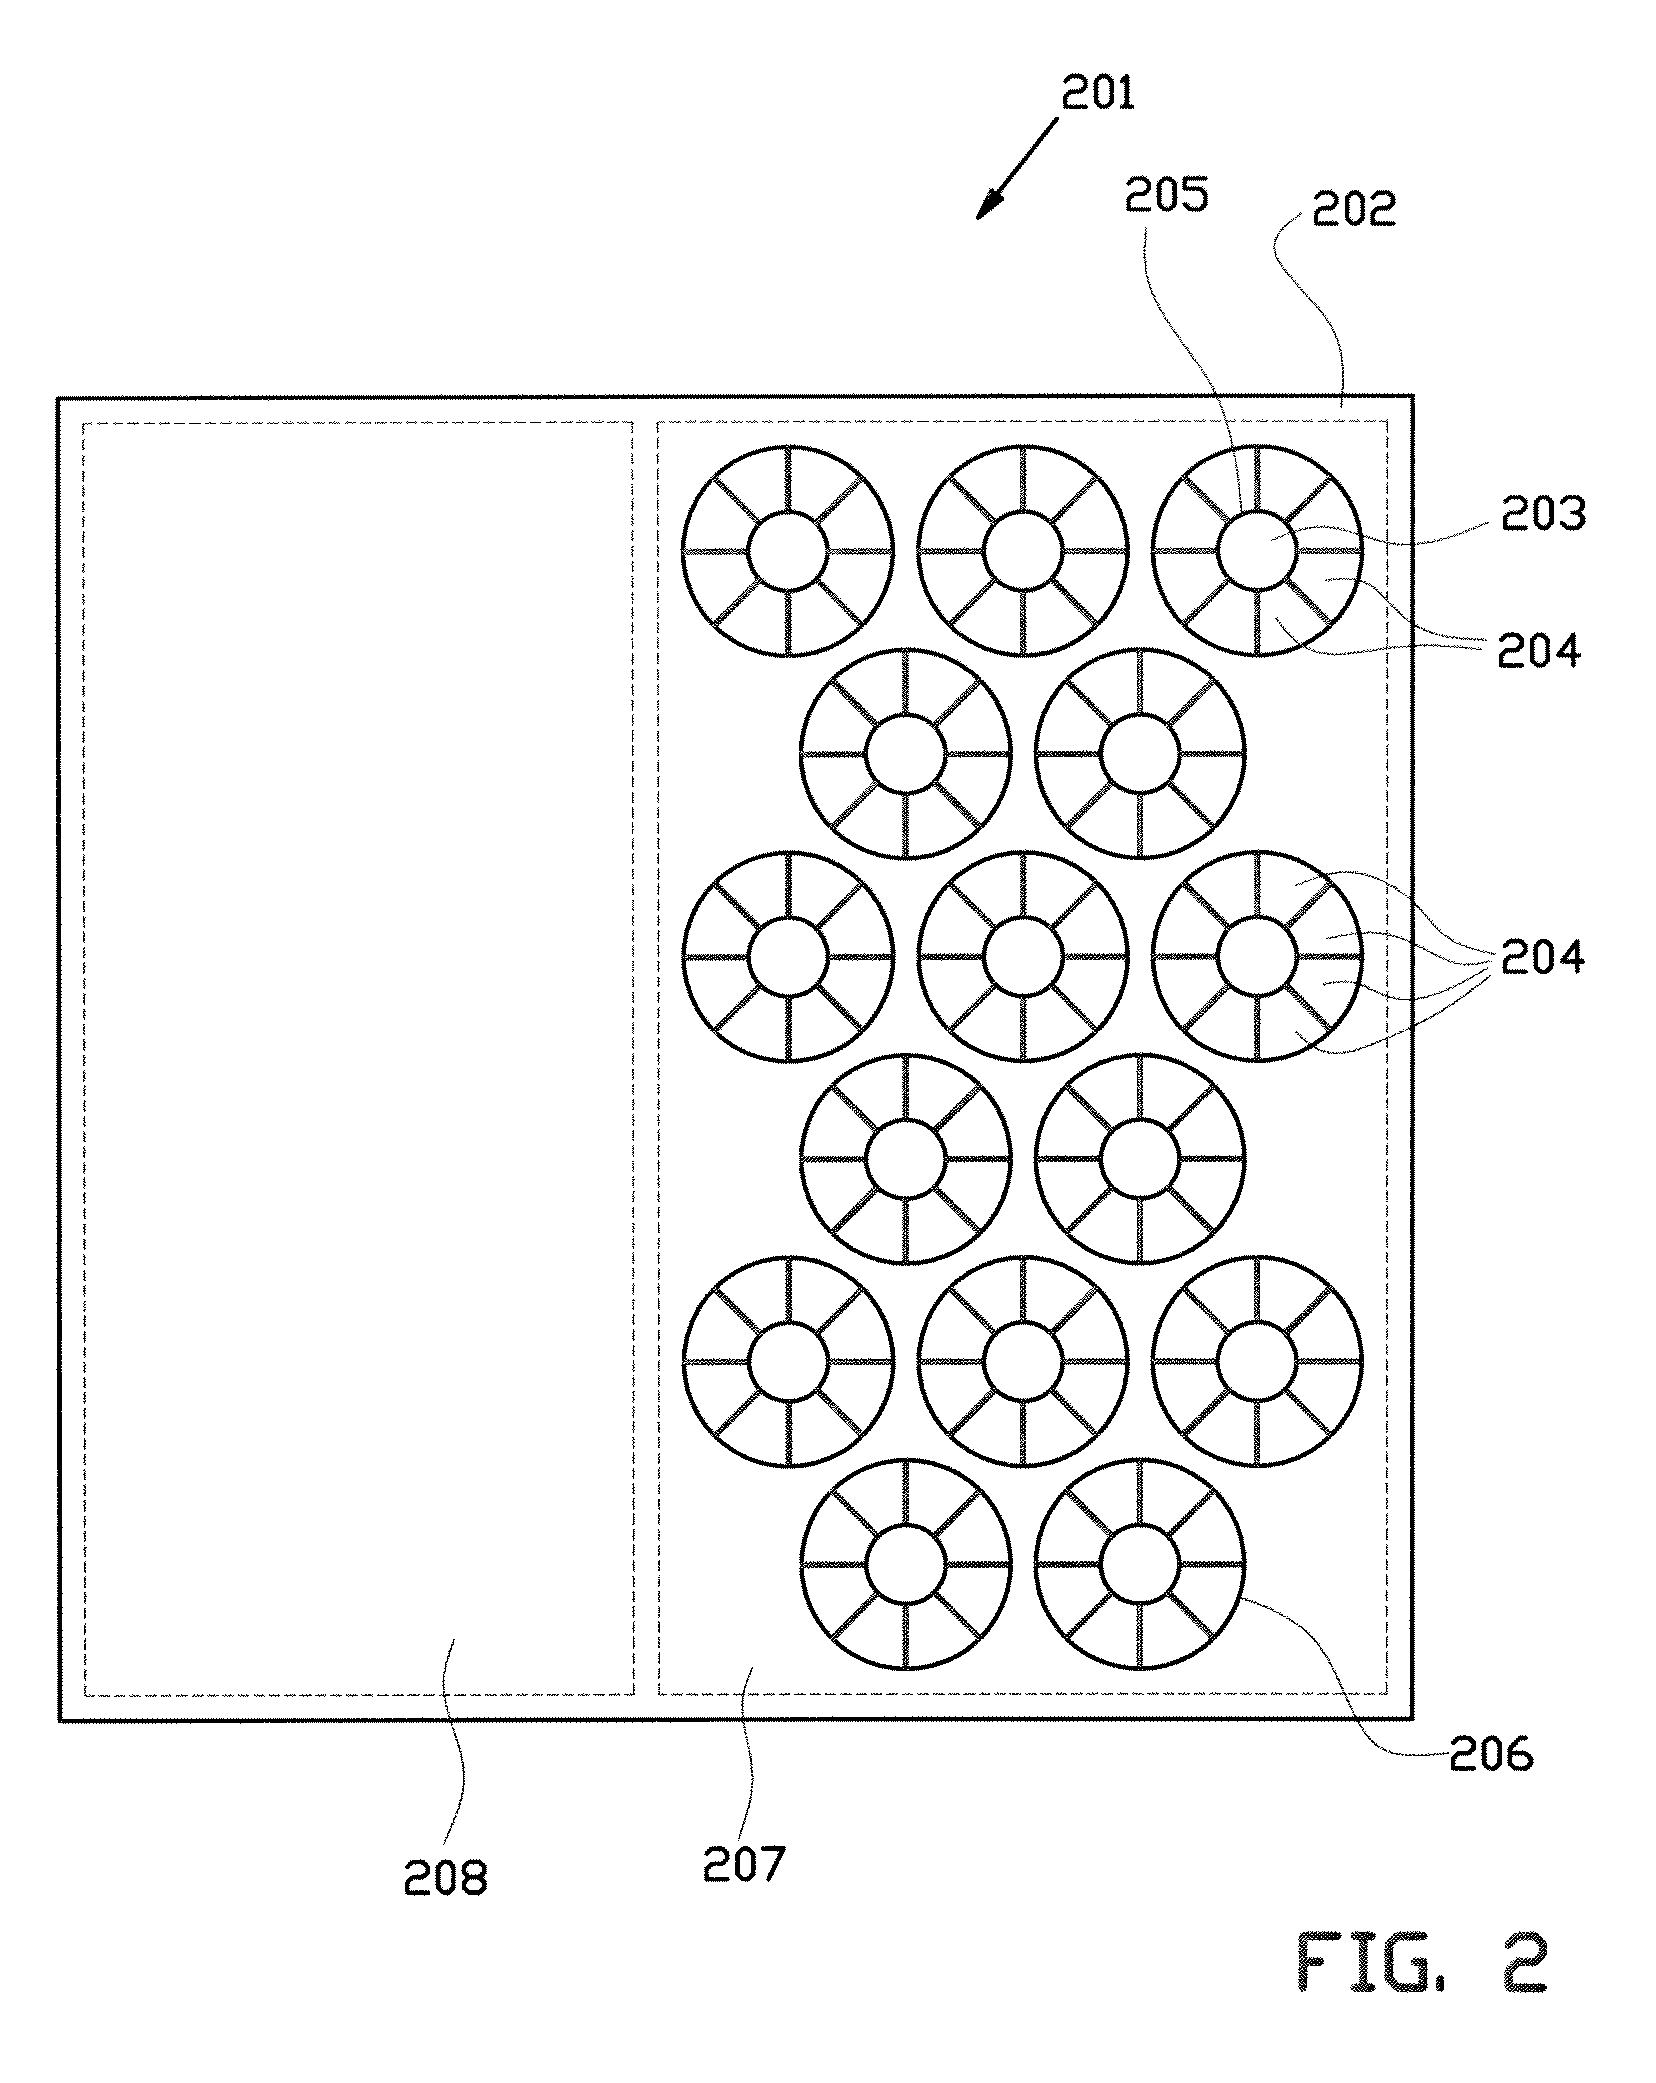 Charged particle system comprising a manipulator device for manipulation of one or more charged particle beams